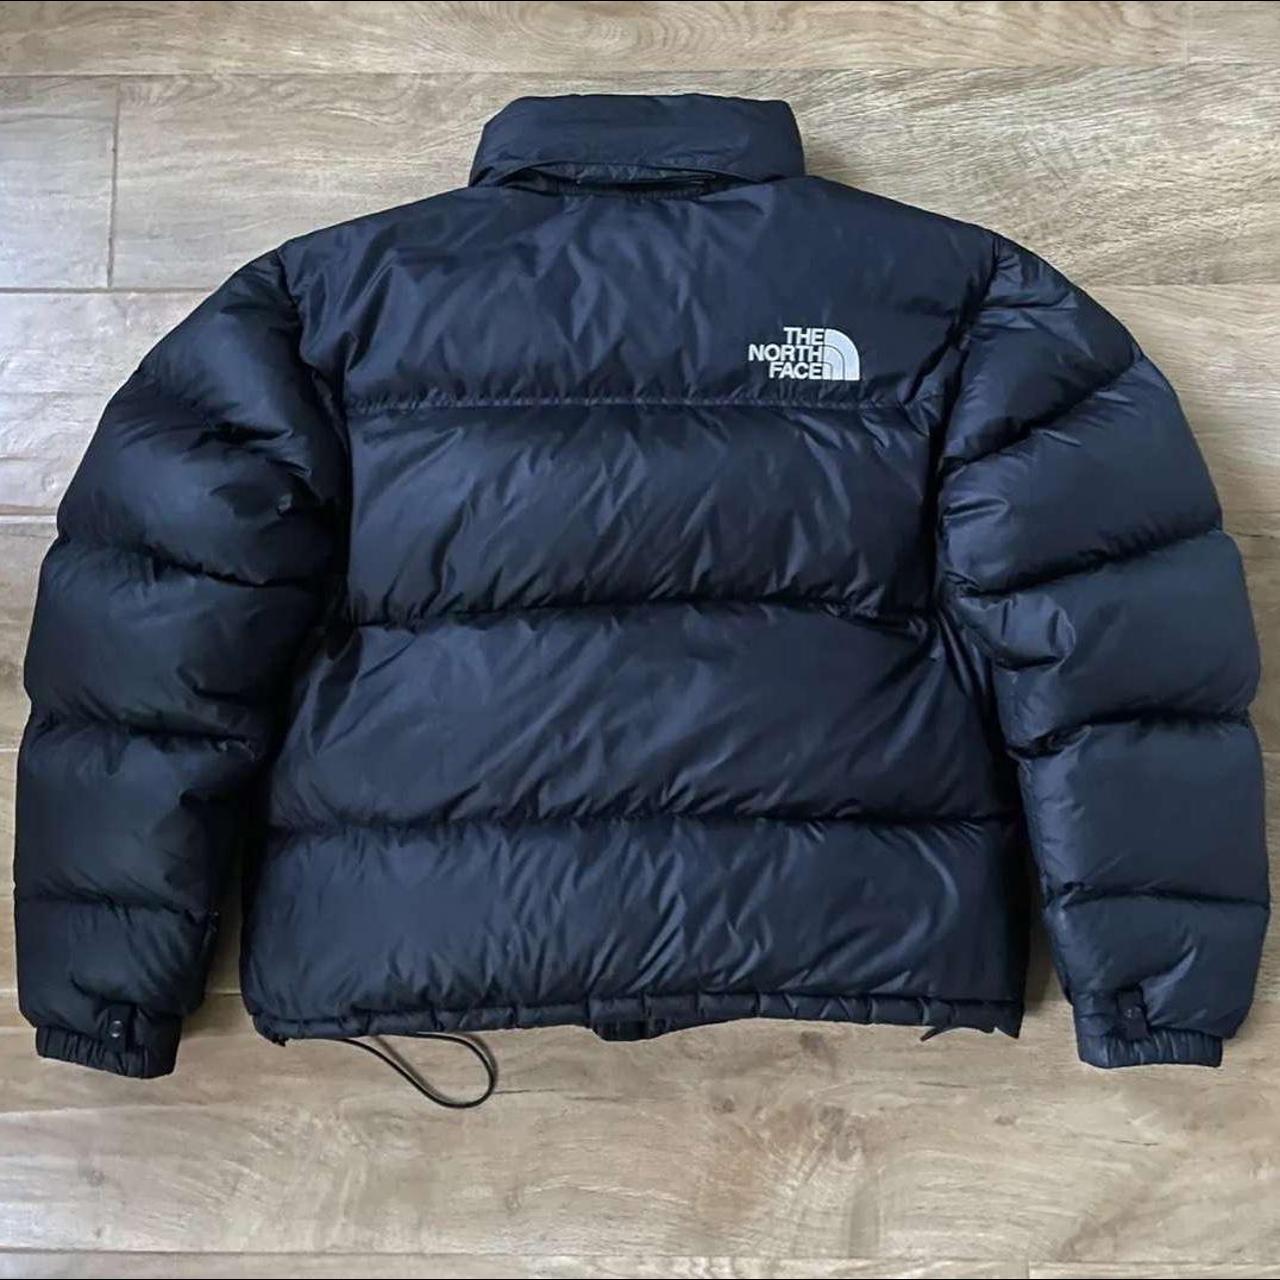 NORTH FACE JACKET IN GOOD CONDITION ON SALE... - Depop